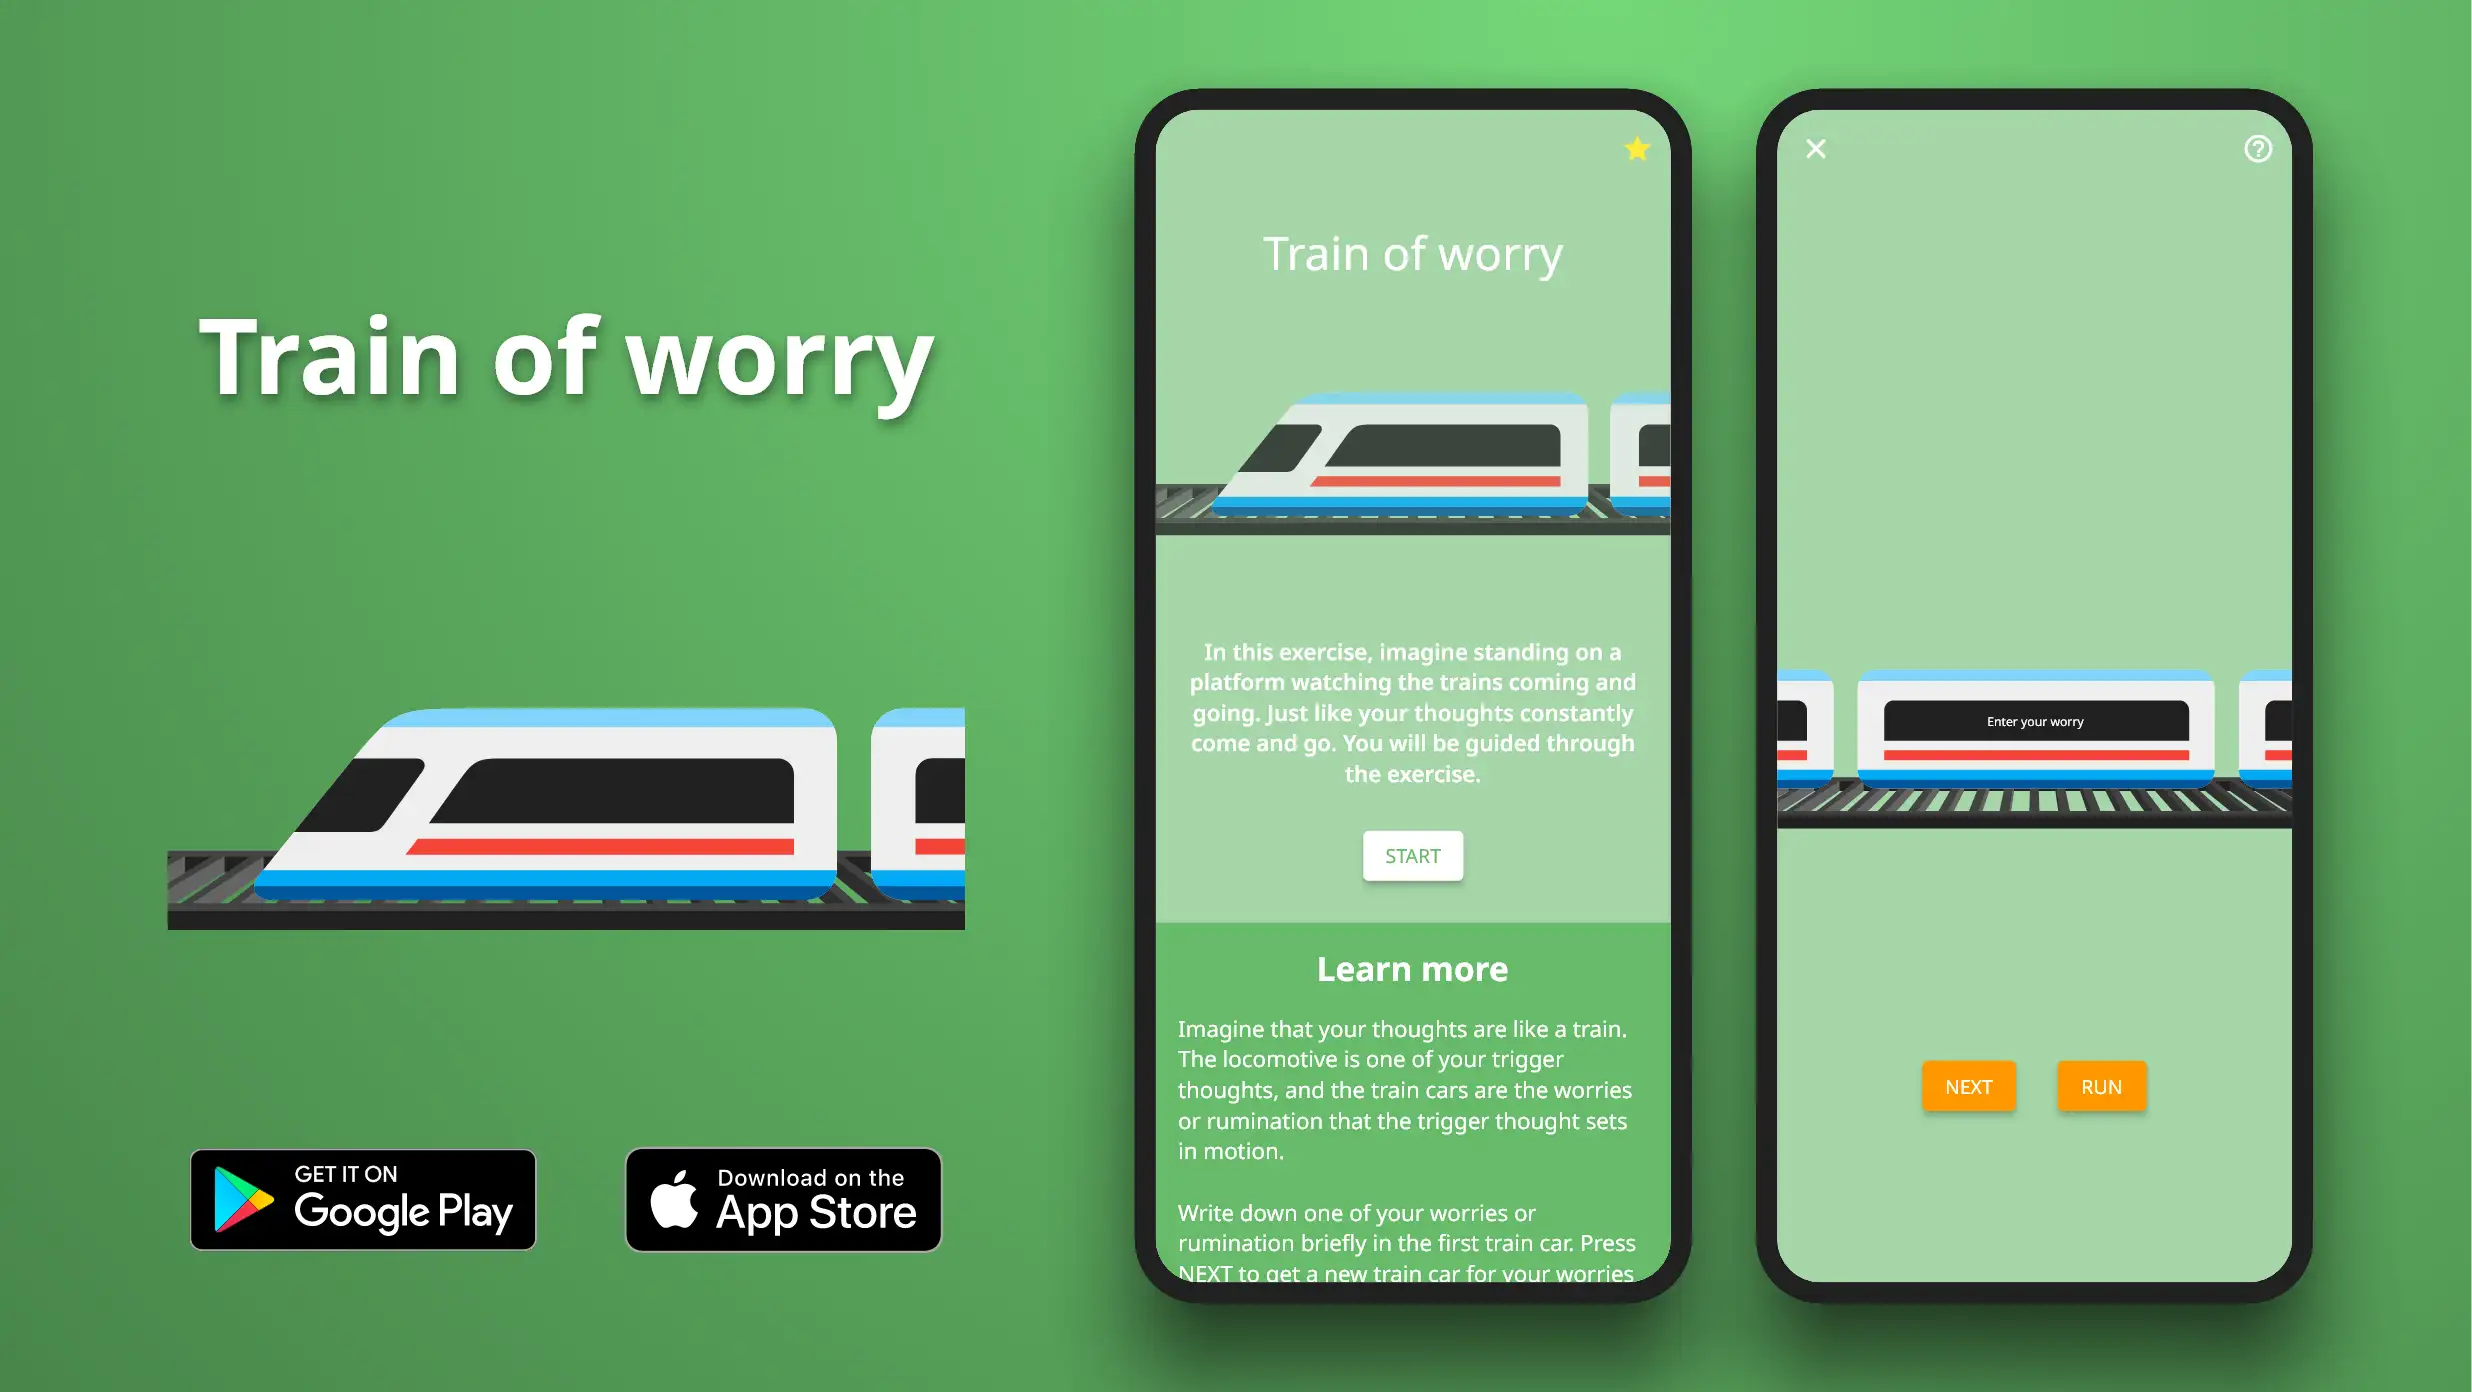 Train of worry exercise in the Meta Learn app.